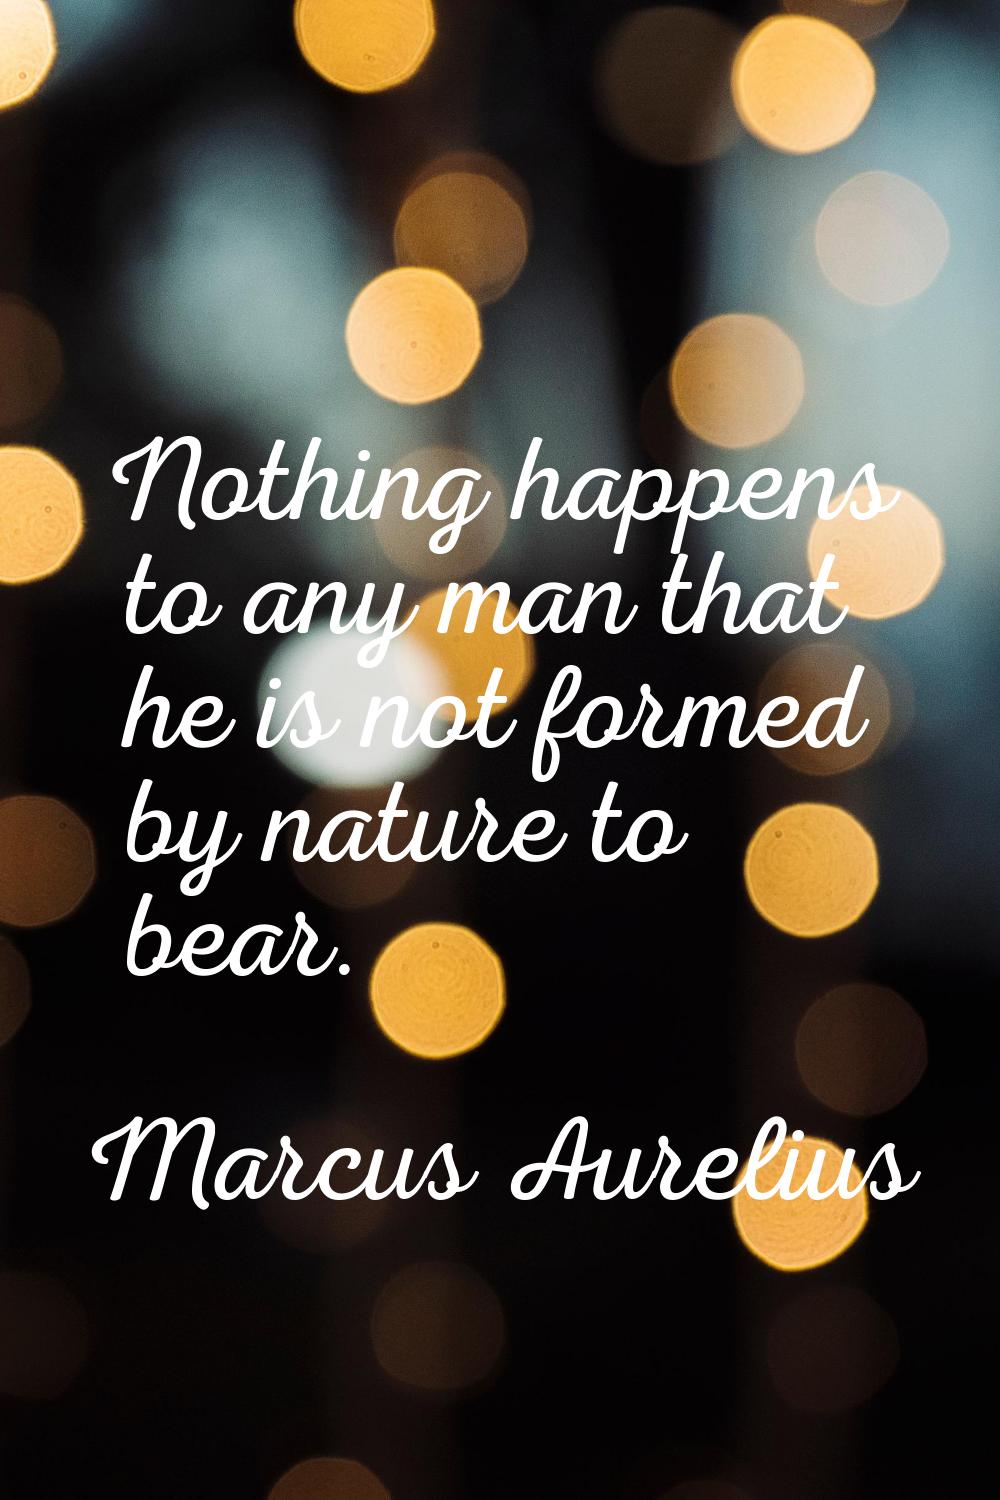 Nothing happens to any man that he is not formed by nature to bear.